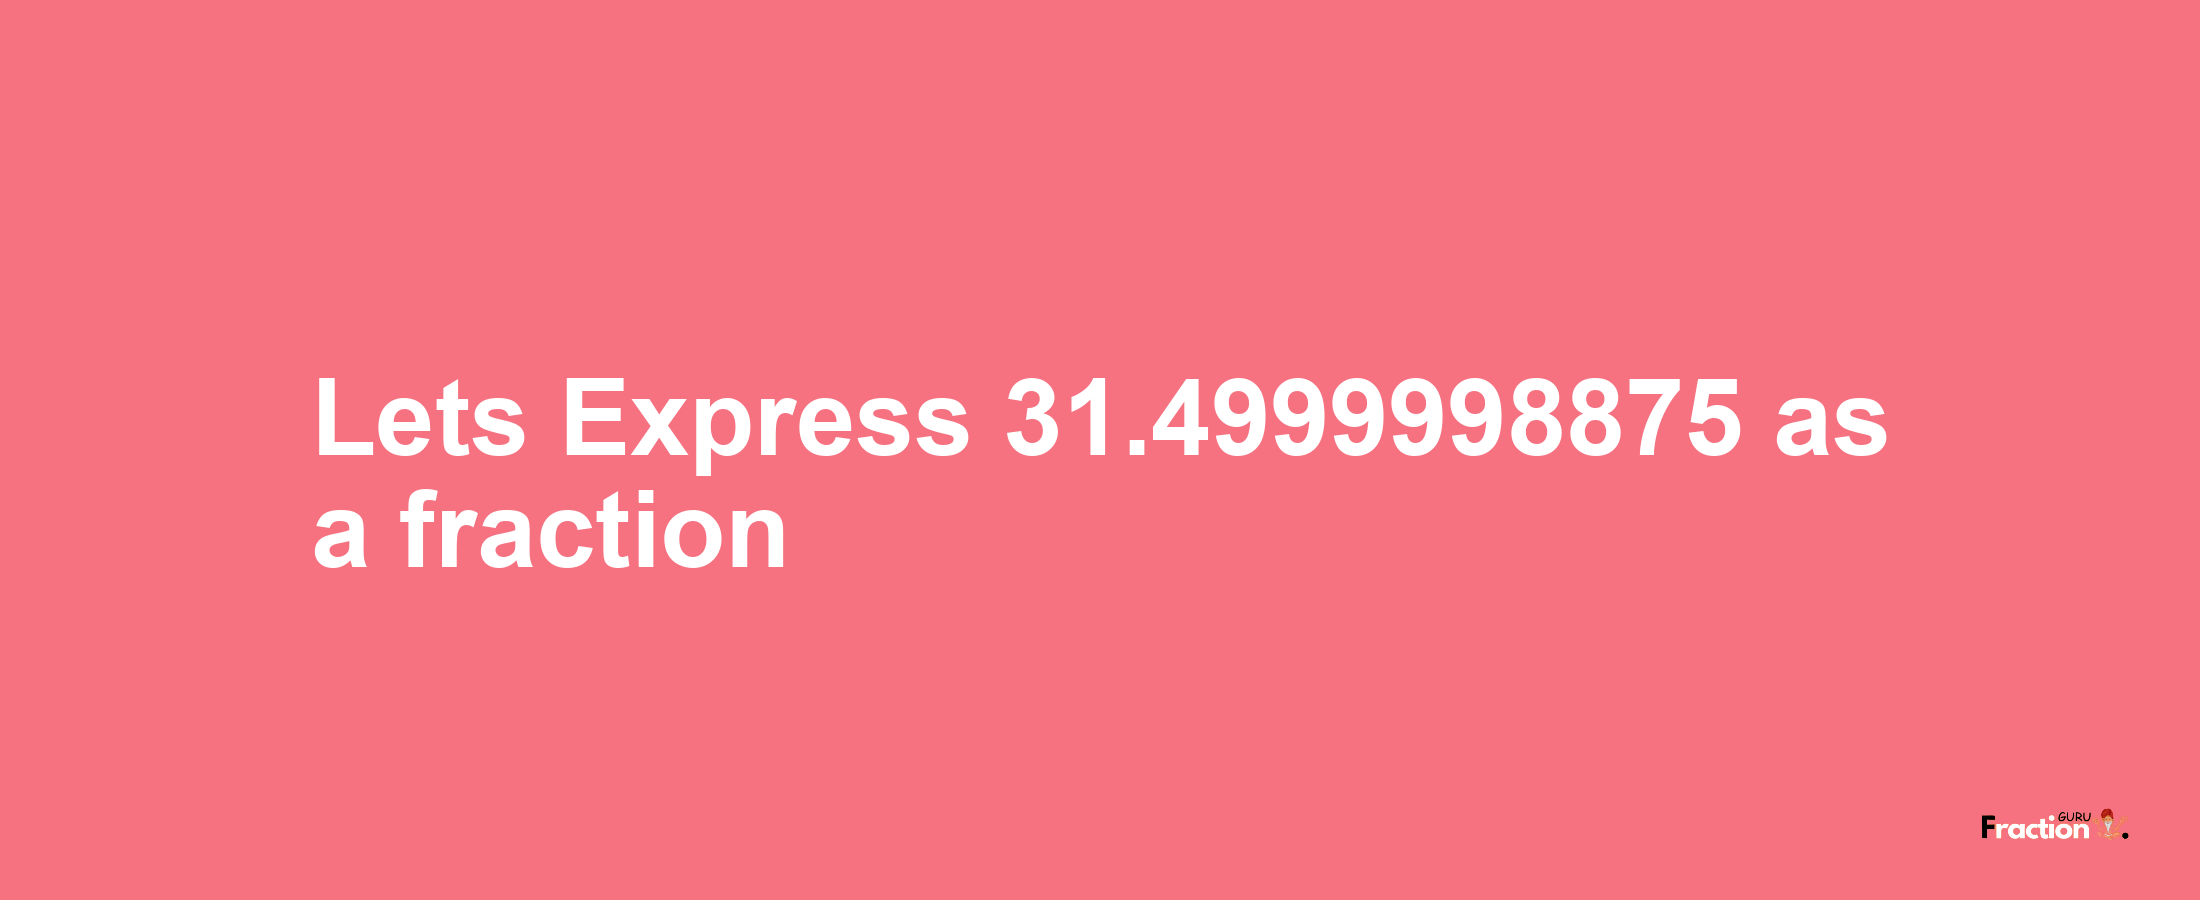 Lets Express 31.4999998875 as afraction